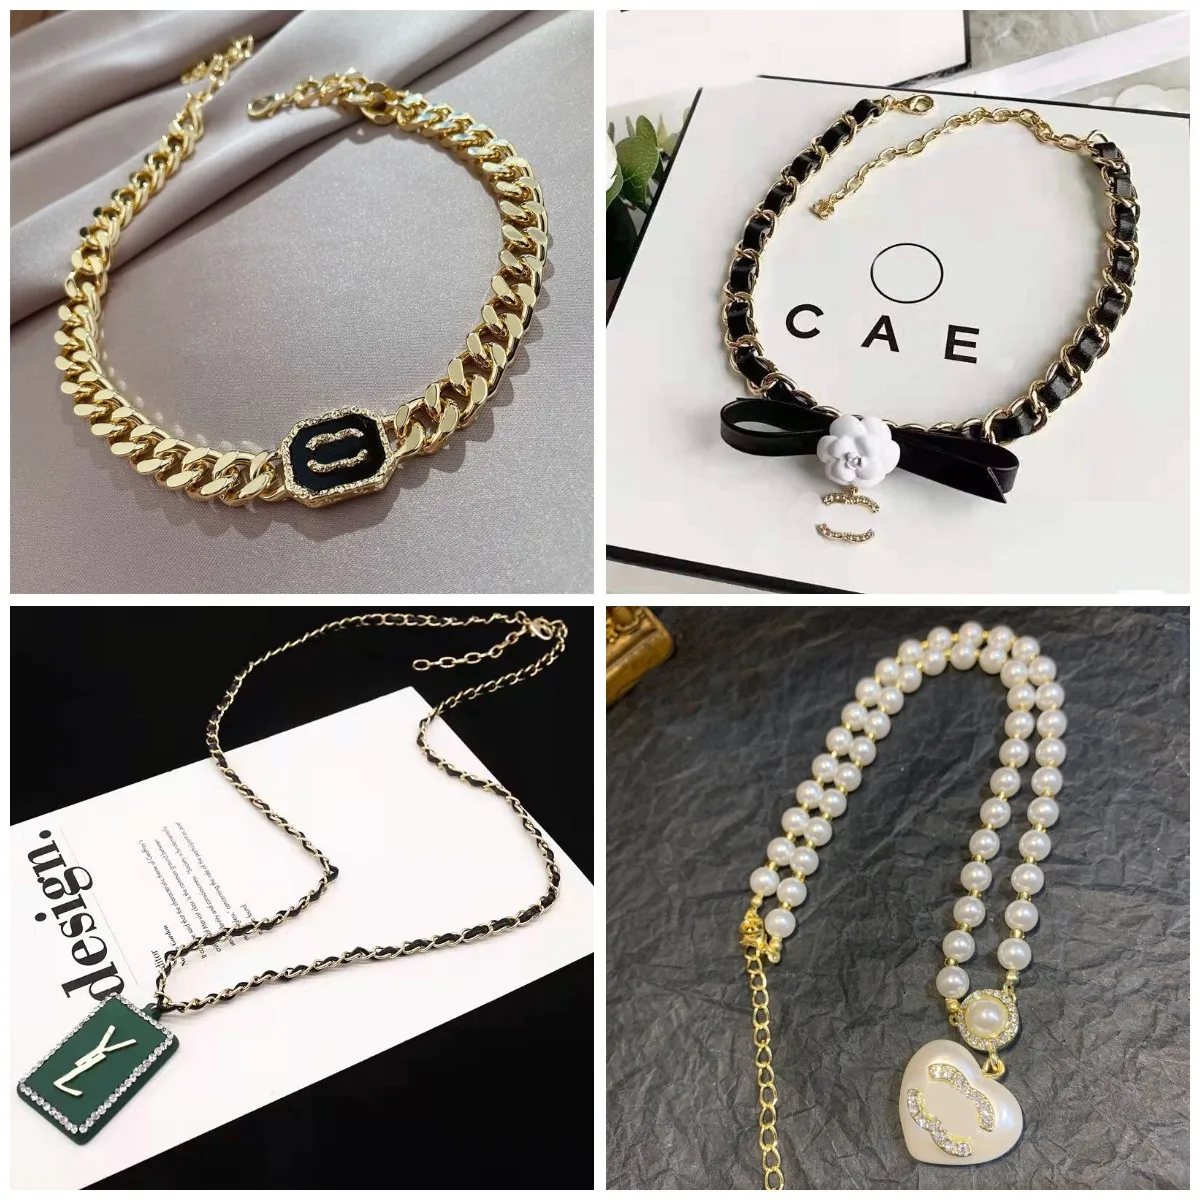 Designer Choker New Women's Gift Love Pendant Necklace Wedding Party Gift Long Chain New Jewelry Spring Pearl Love Long Chain High Sense smycken grossist